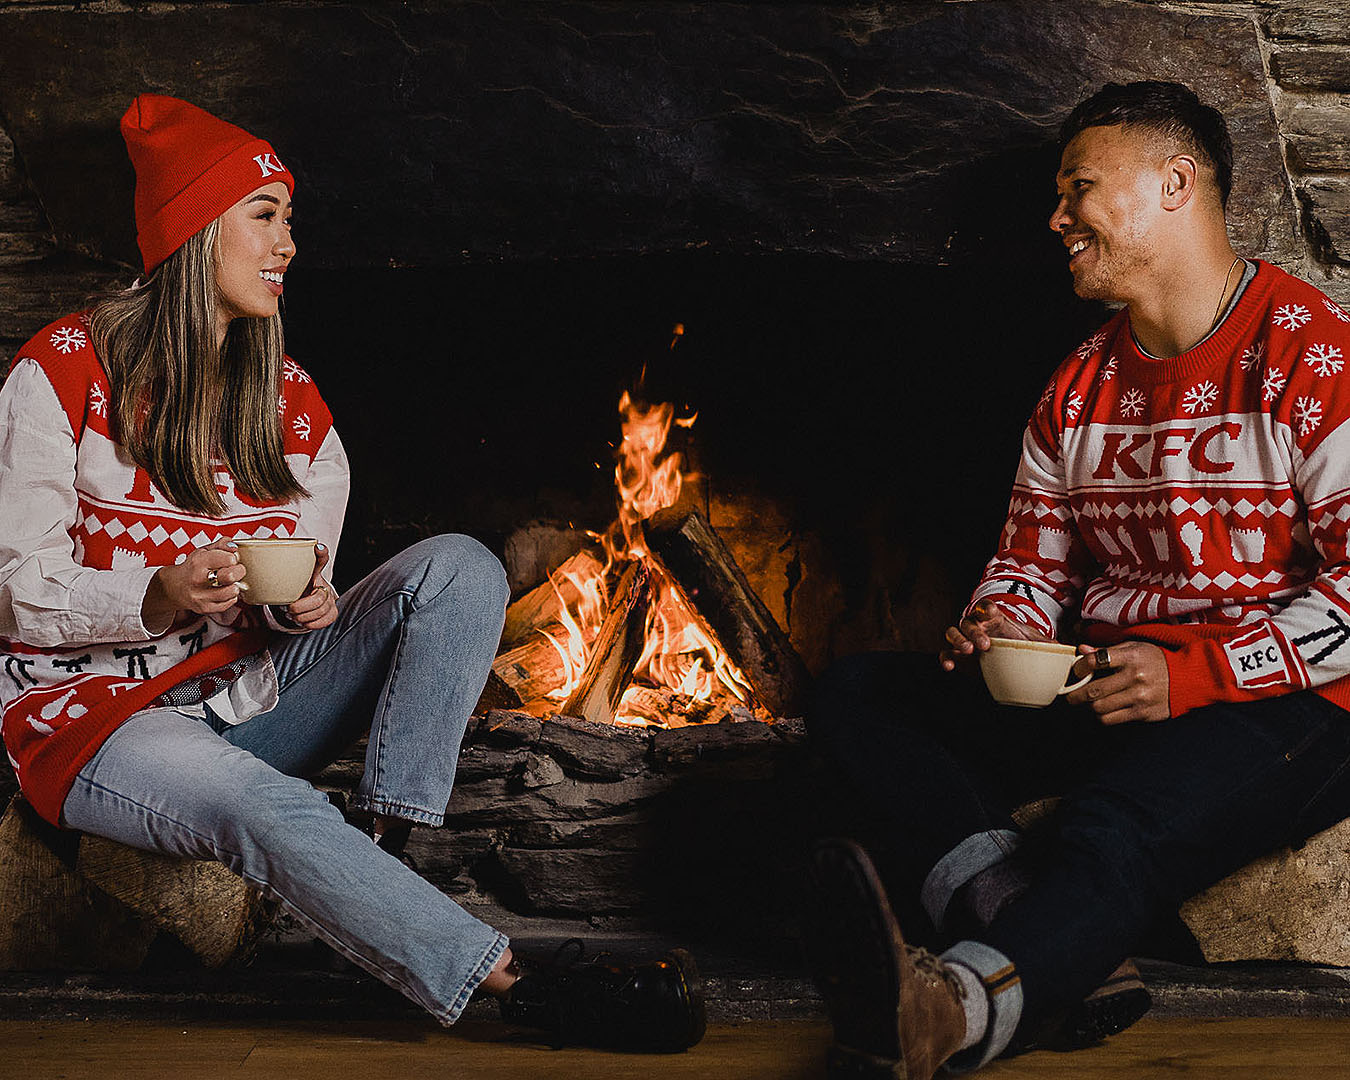 Mid winter jumpers and beanies are worn around a roaring fire.